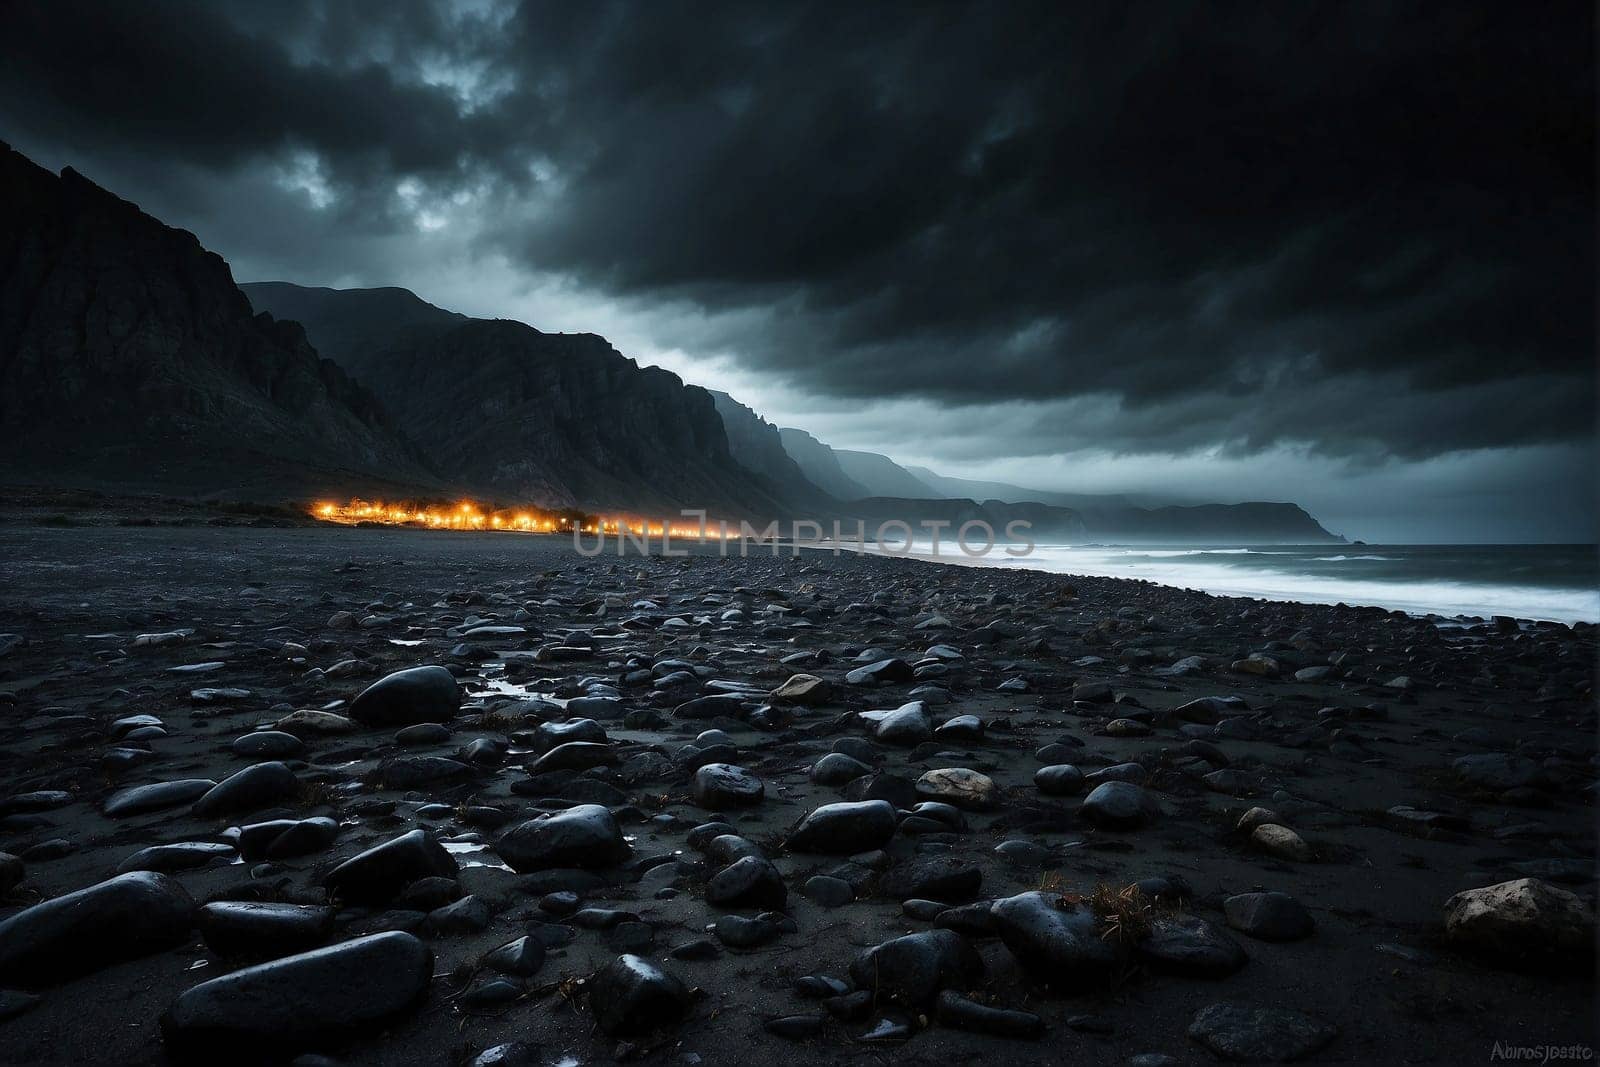 A photo of a beach at night, featuring a dark sky and the calm waves rolling towards the shore.